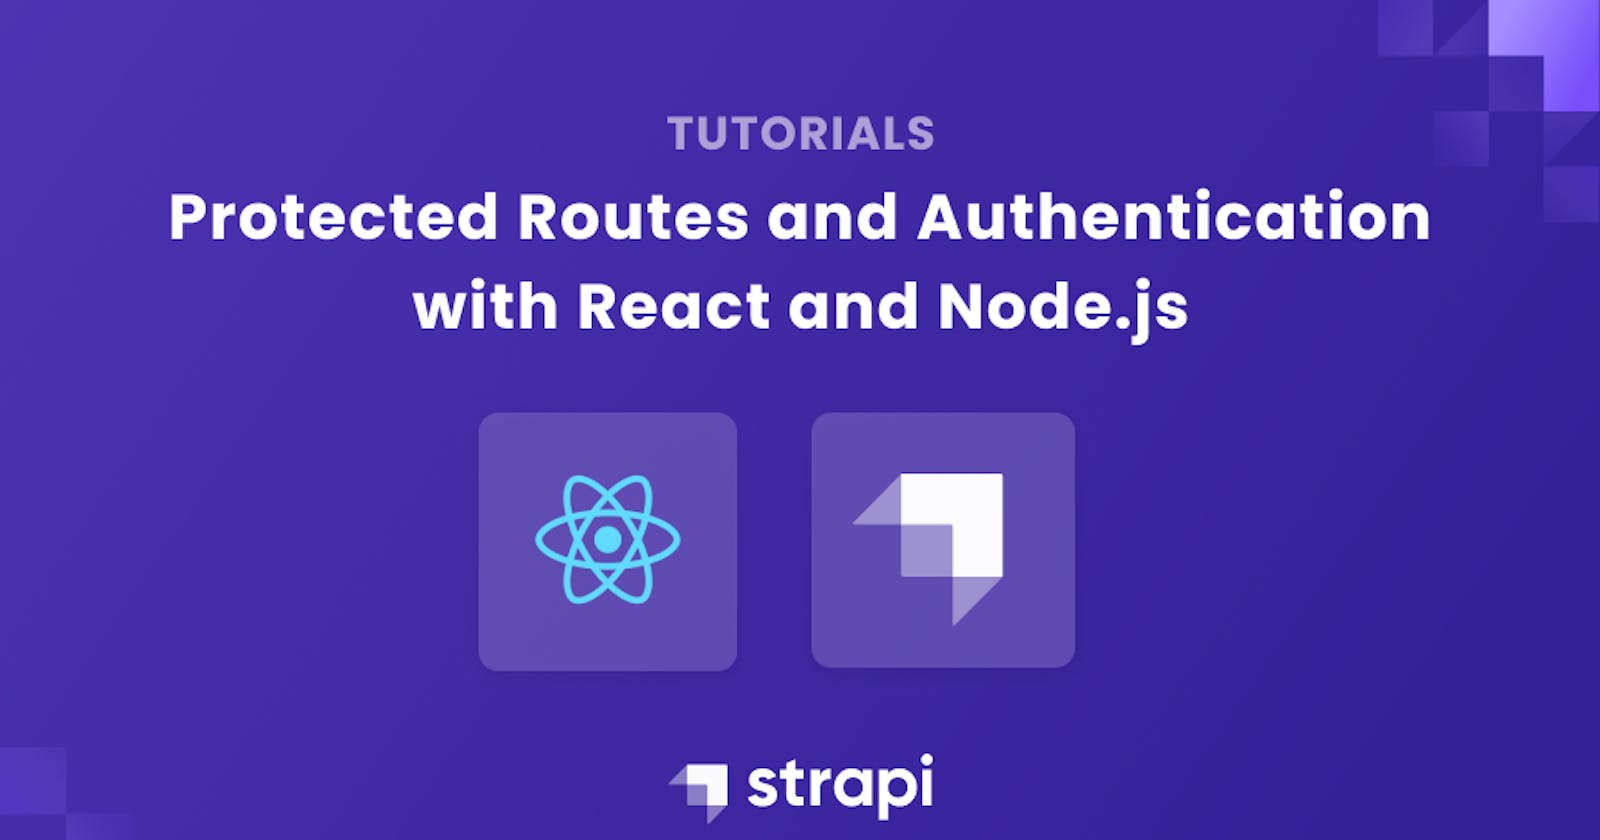 Protected Routes and Authentication with React and Node.js